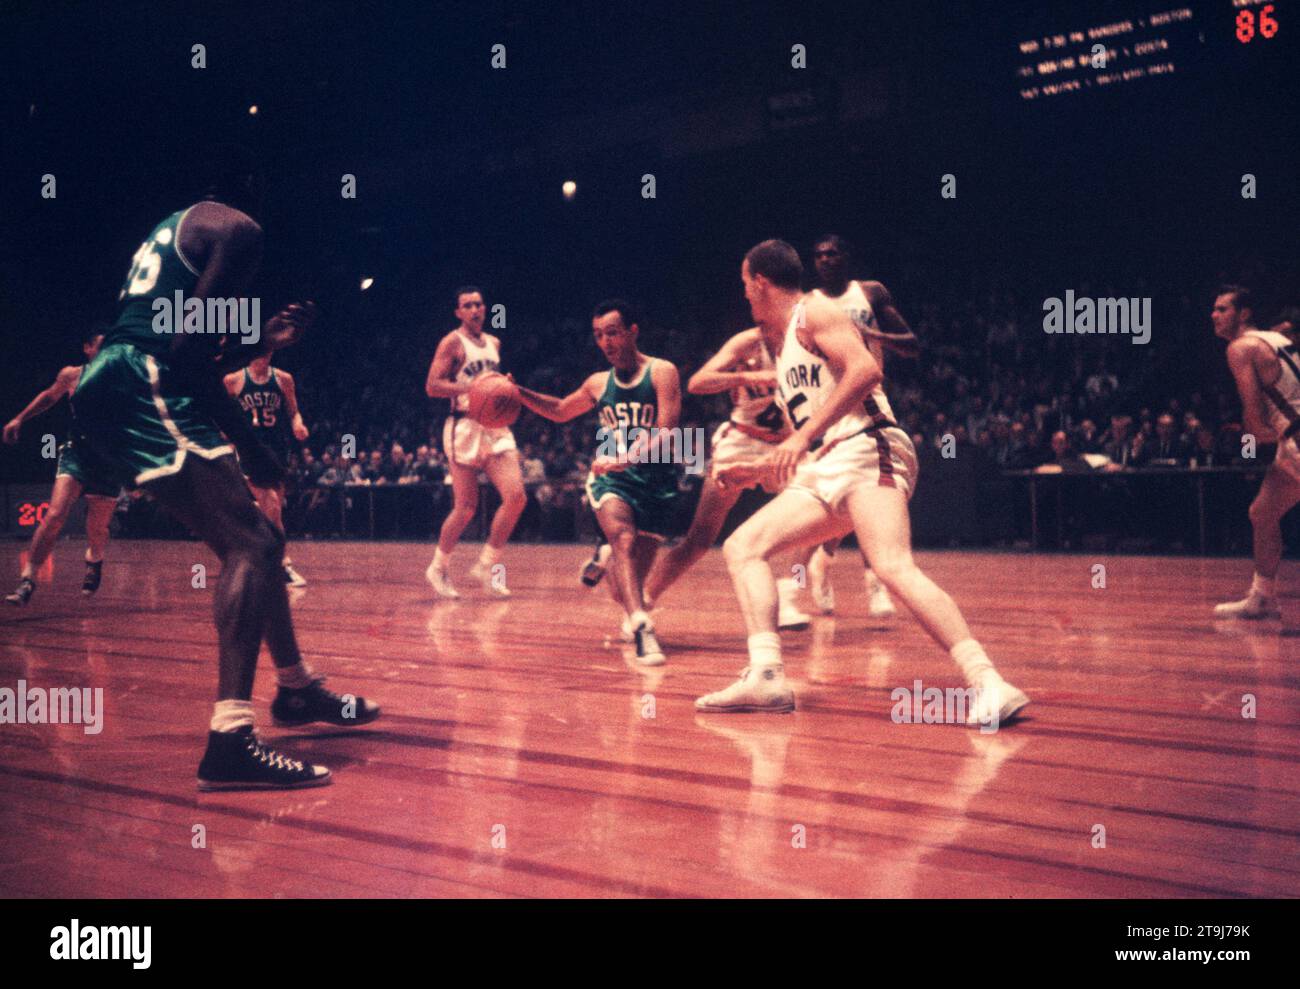 NEW YORK, NY - OCTOBER 25: Bob Cousy #14 of the Boston Celtics dribbles as Frank Selvy #15 of the New York Knicks defends during an NBA game on October 25, 1958 at the Madison Square Garden in New York, New York.  (Photo by Hy Peskin) *** Local Caption *** Bob Cousy;Frank Selvy Stock Photo